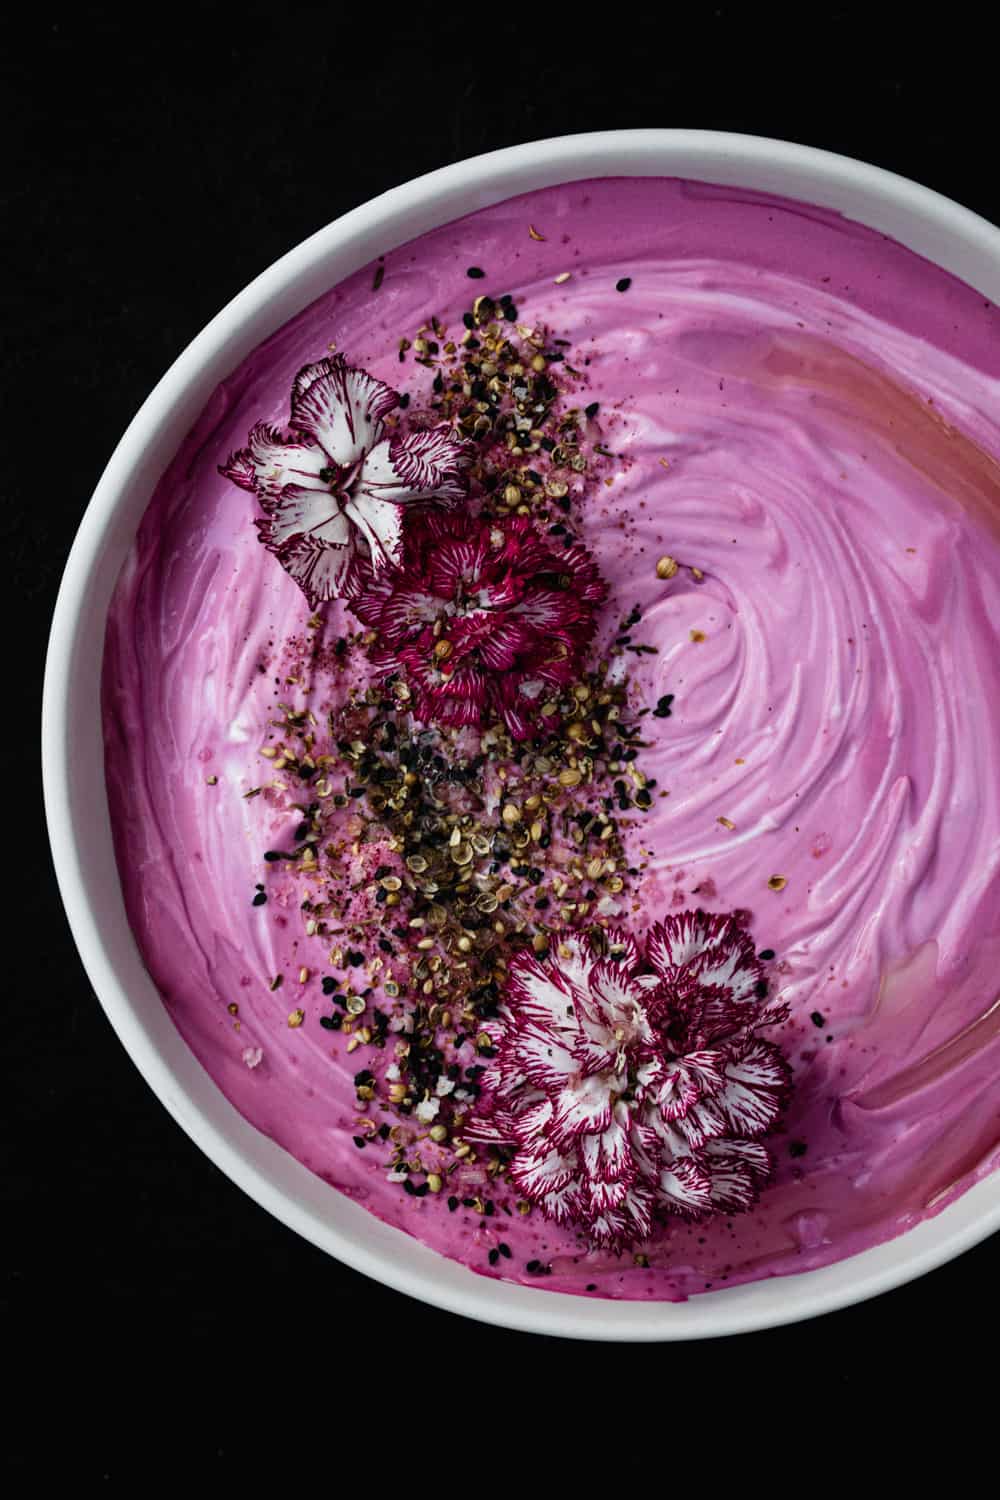 A vibrantly prink beet hummus topped with edible flowers, seeds and olive oil. Overhead shot on a black background.